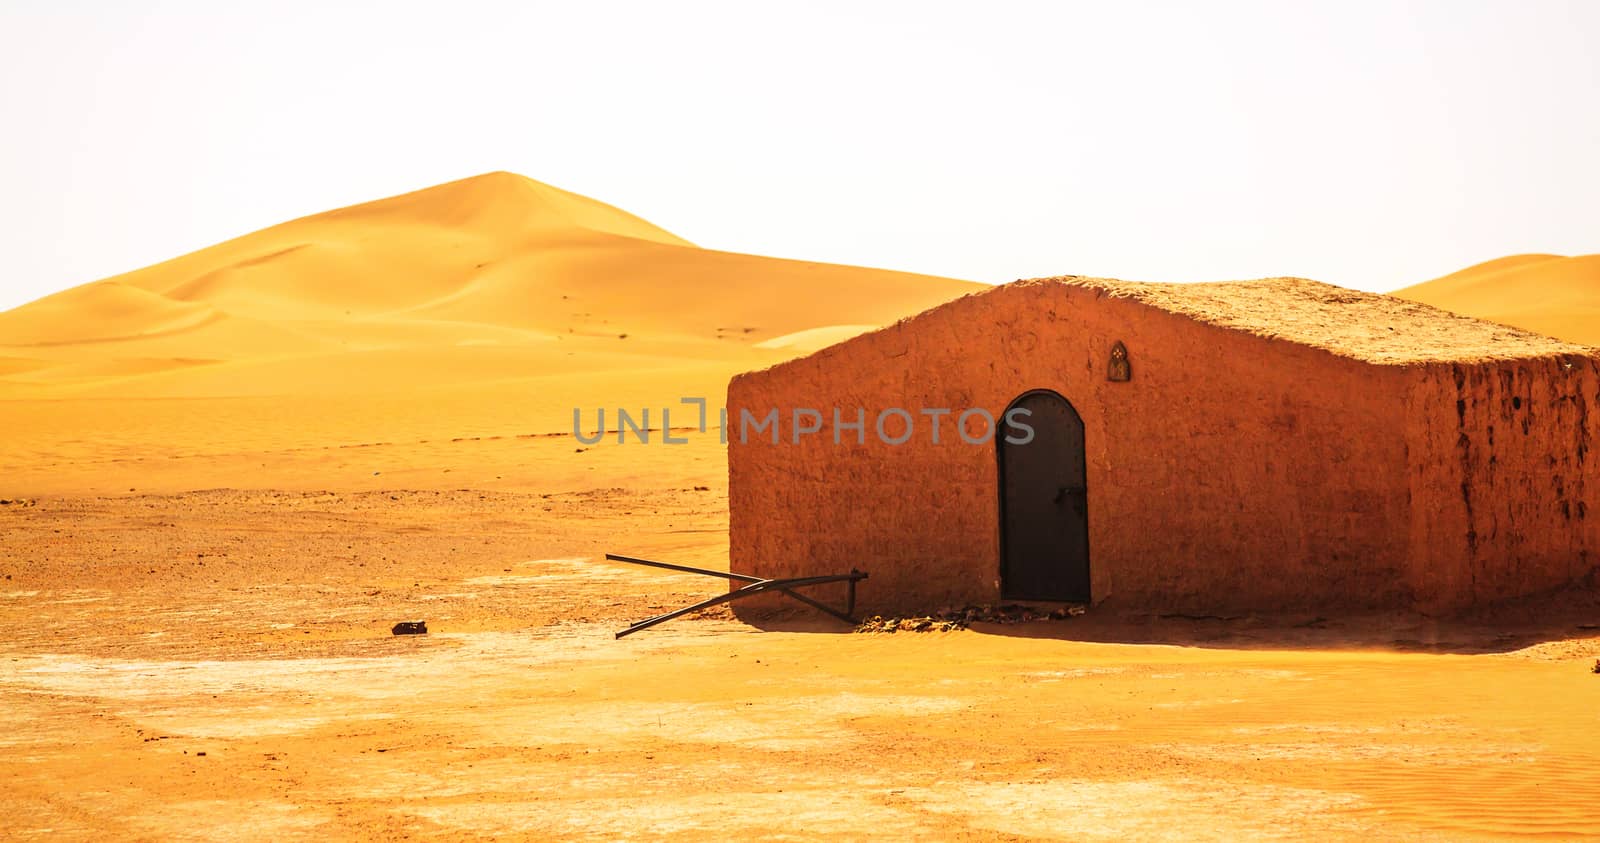 Bedouin Berber nomad tent in the desert Morocco - panoramic view